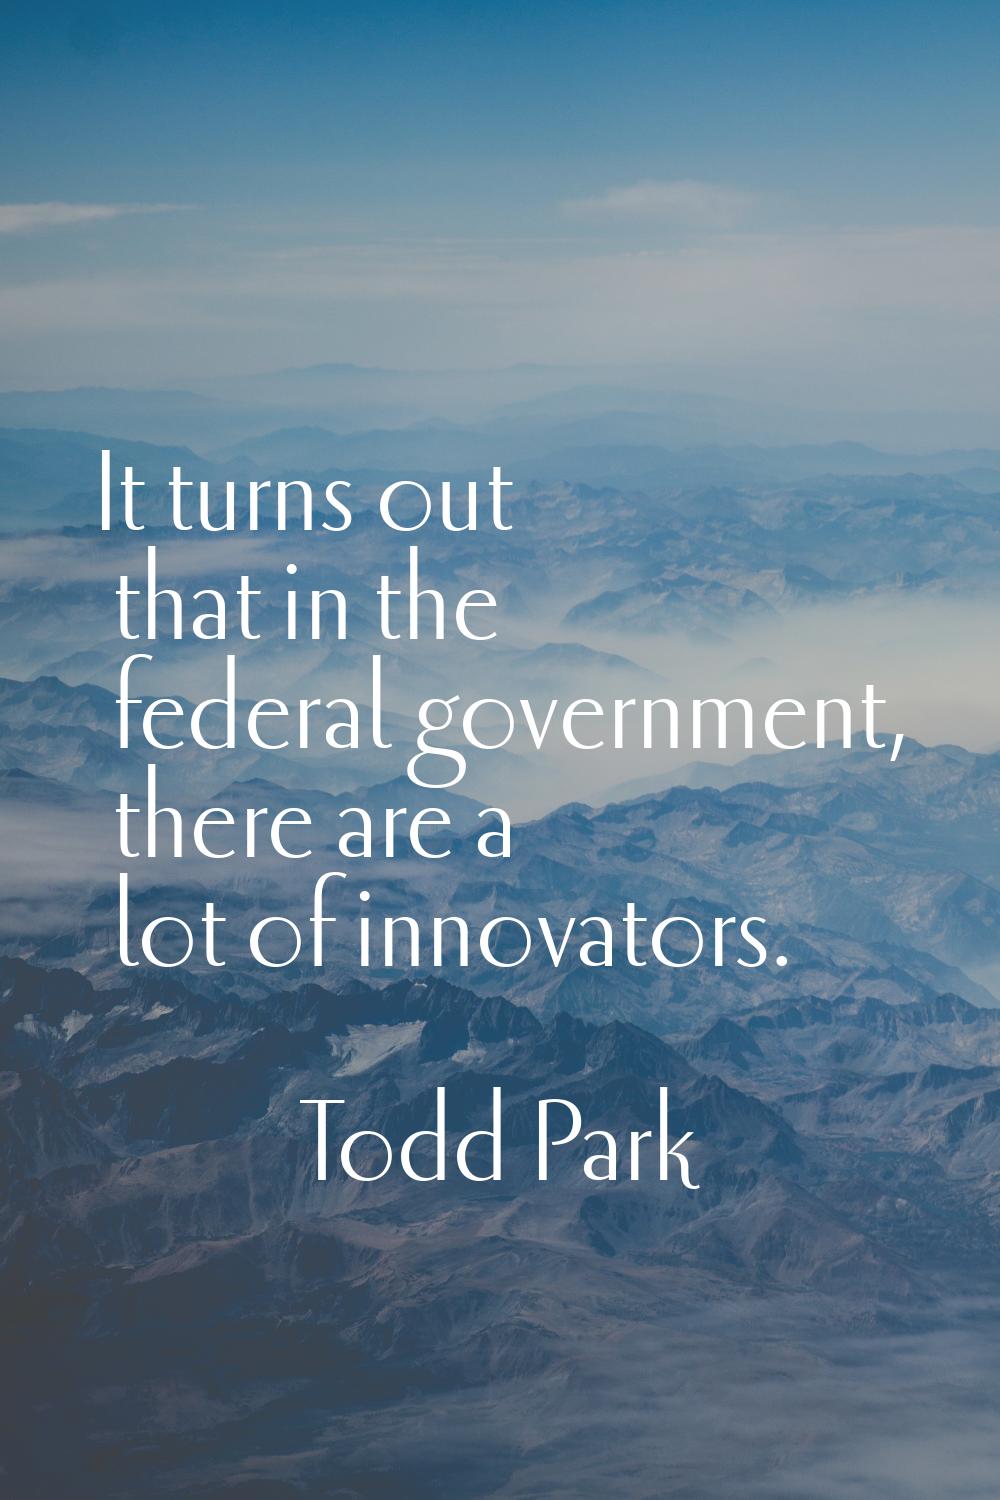 It turns out that in the federal government, there are a lot of innovators.